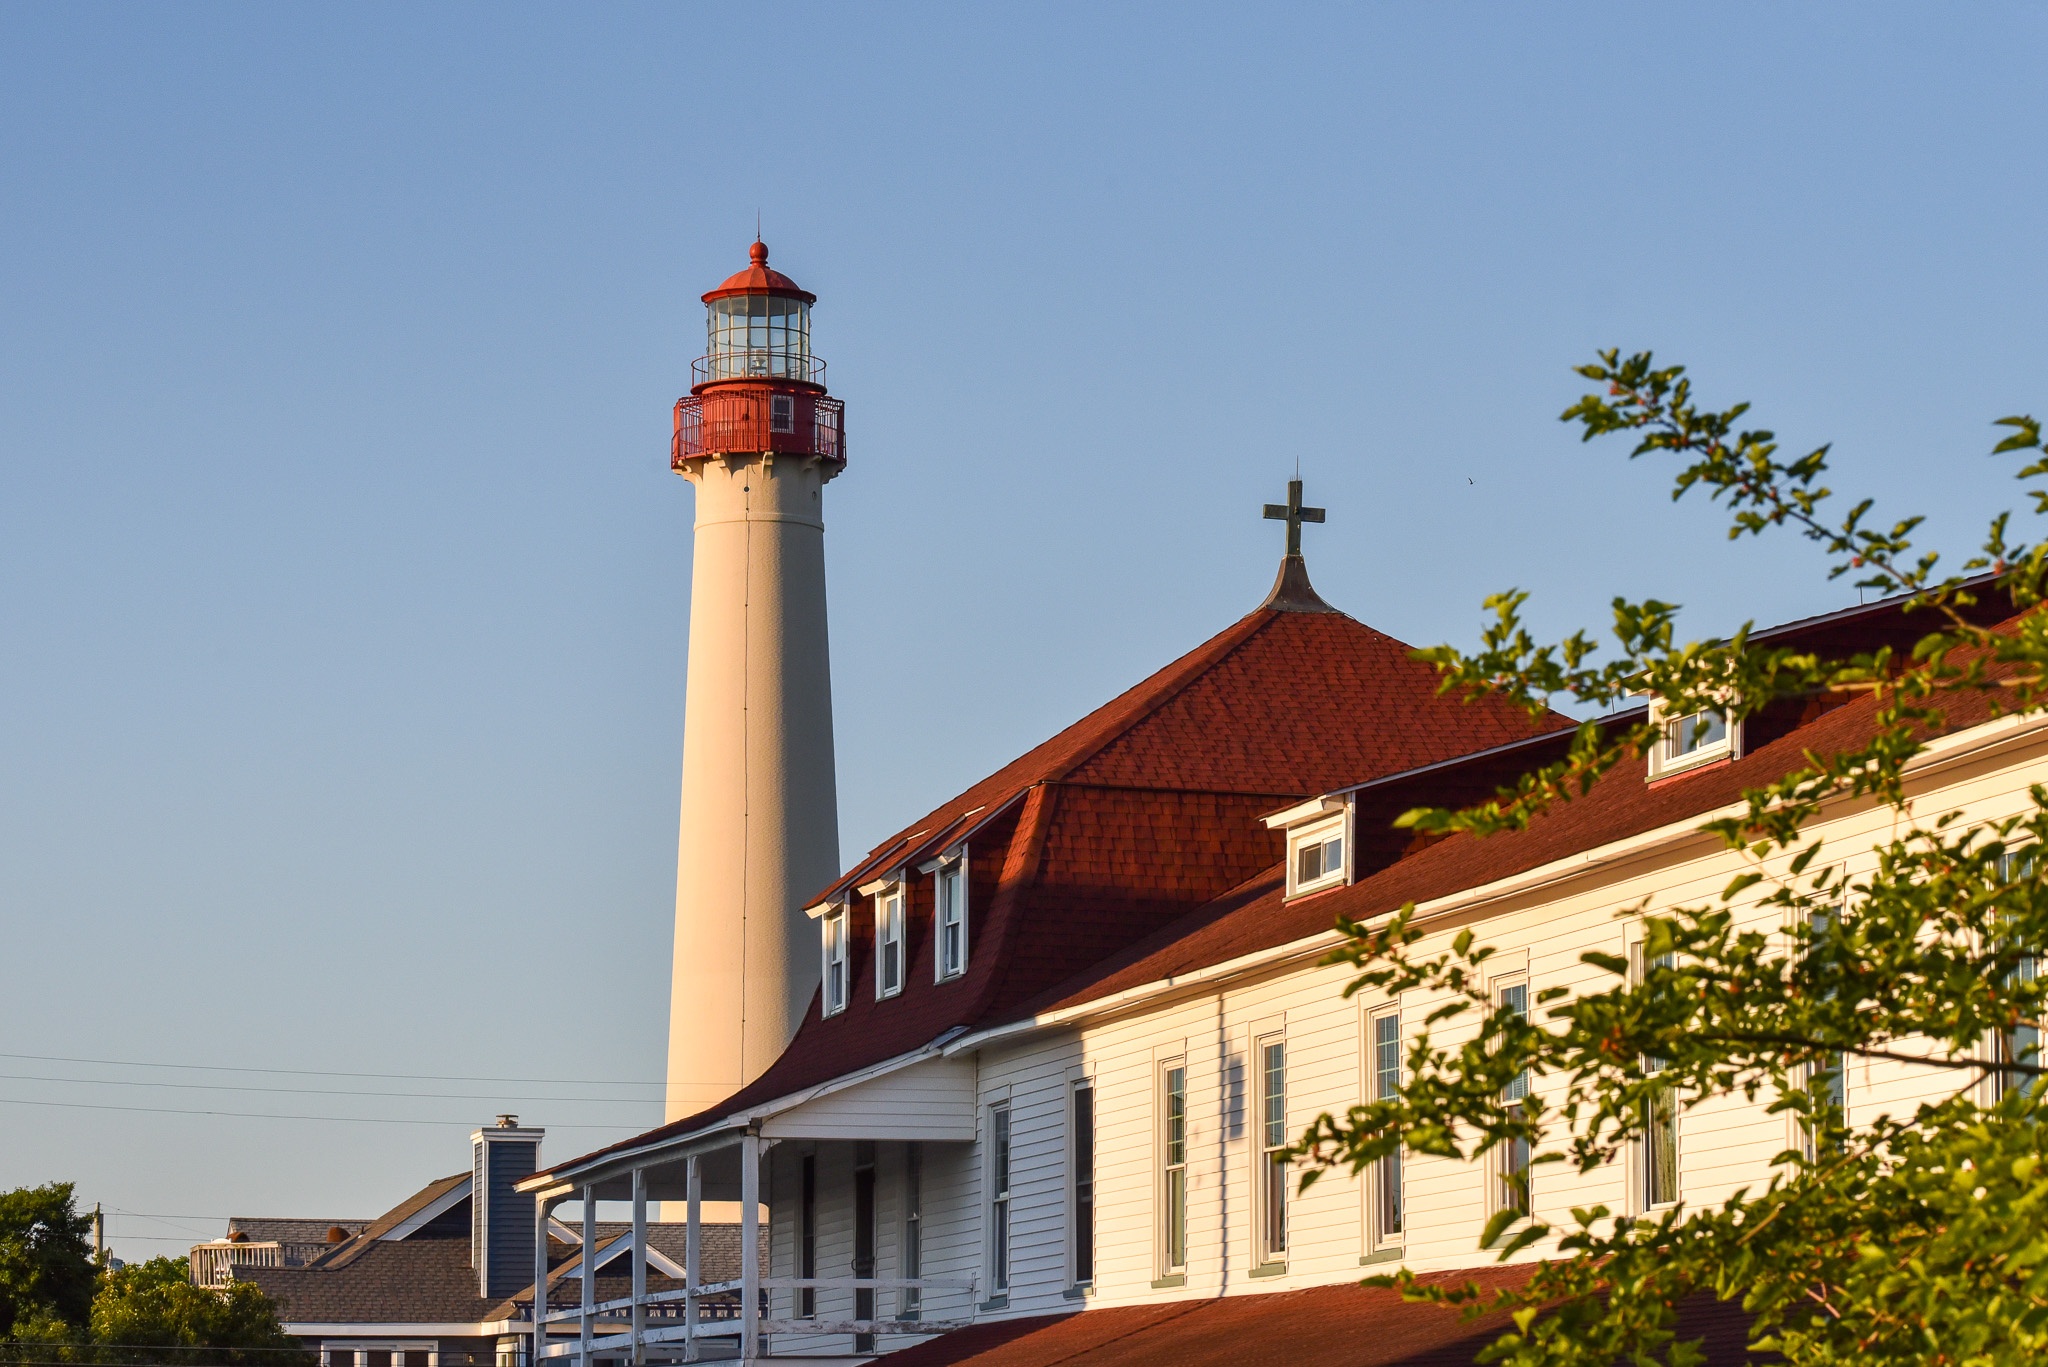 Late Evening Sunlight Where the Cape May Lighthouse and Cape May Point Science Center has a golden Hue.